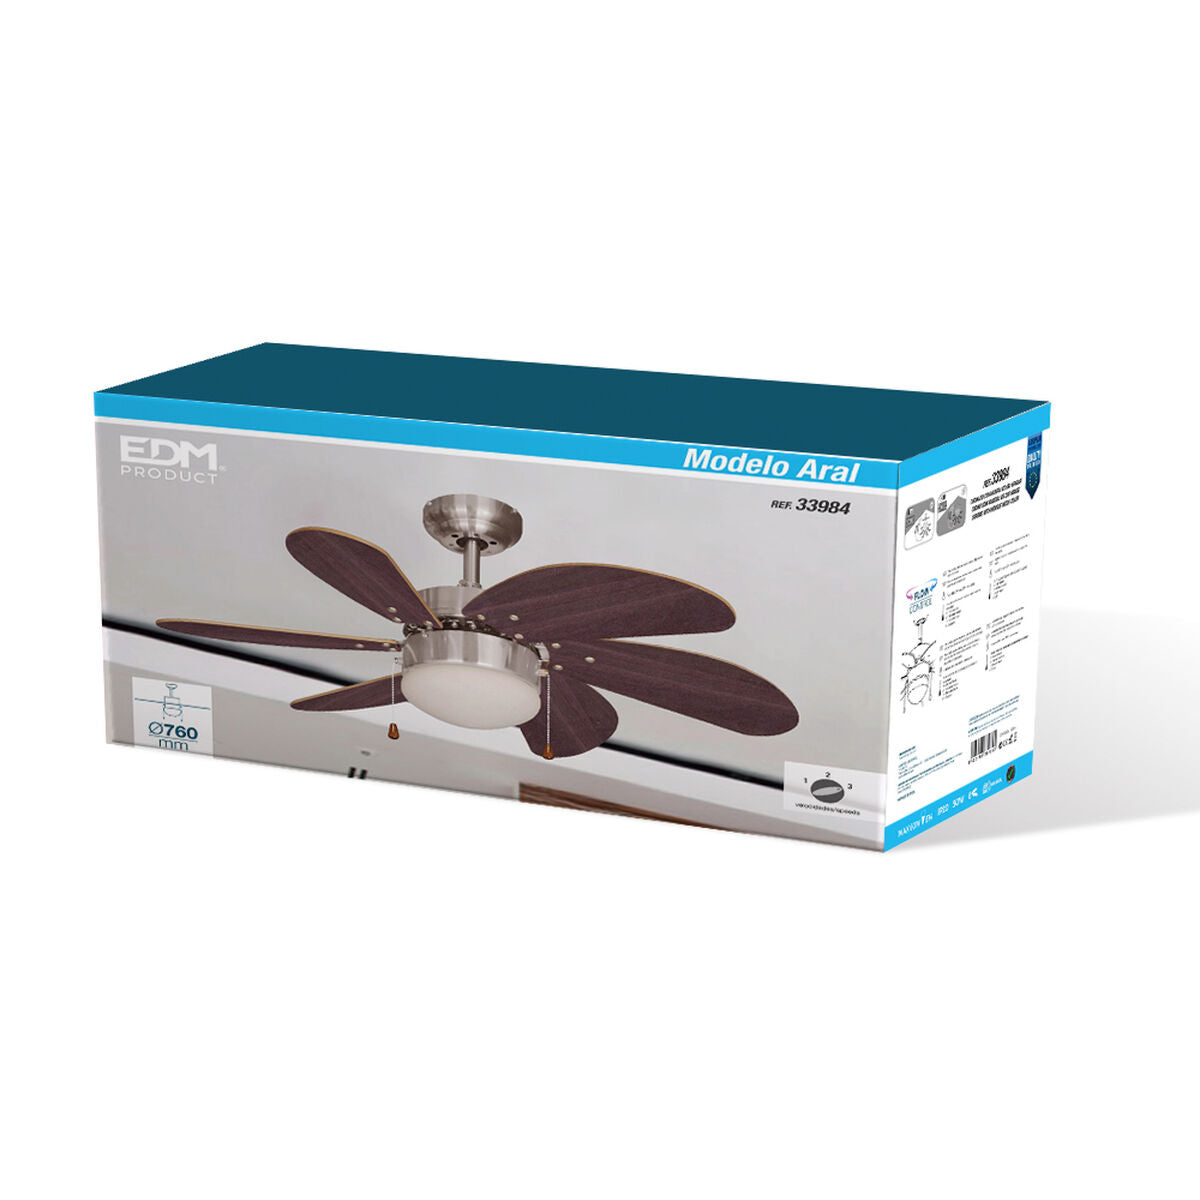 Ceiling Fan with Light EDM 33984 Aral Wengue nickel 50 W, EDM, Lighting, Indoor lighting, ceiling-fan-with-light-edm-33984-aral-wengue-nickel-50-w, Brand_EDM, category-reference-2399, category-reference-2450, category-reference-2451, category-reference-t-10333, category-reference-t-10347, category-reference-t-19657, Condition_NEW, led / lighting, Price_100 - 200, small electric appliances, summer, RiotNook